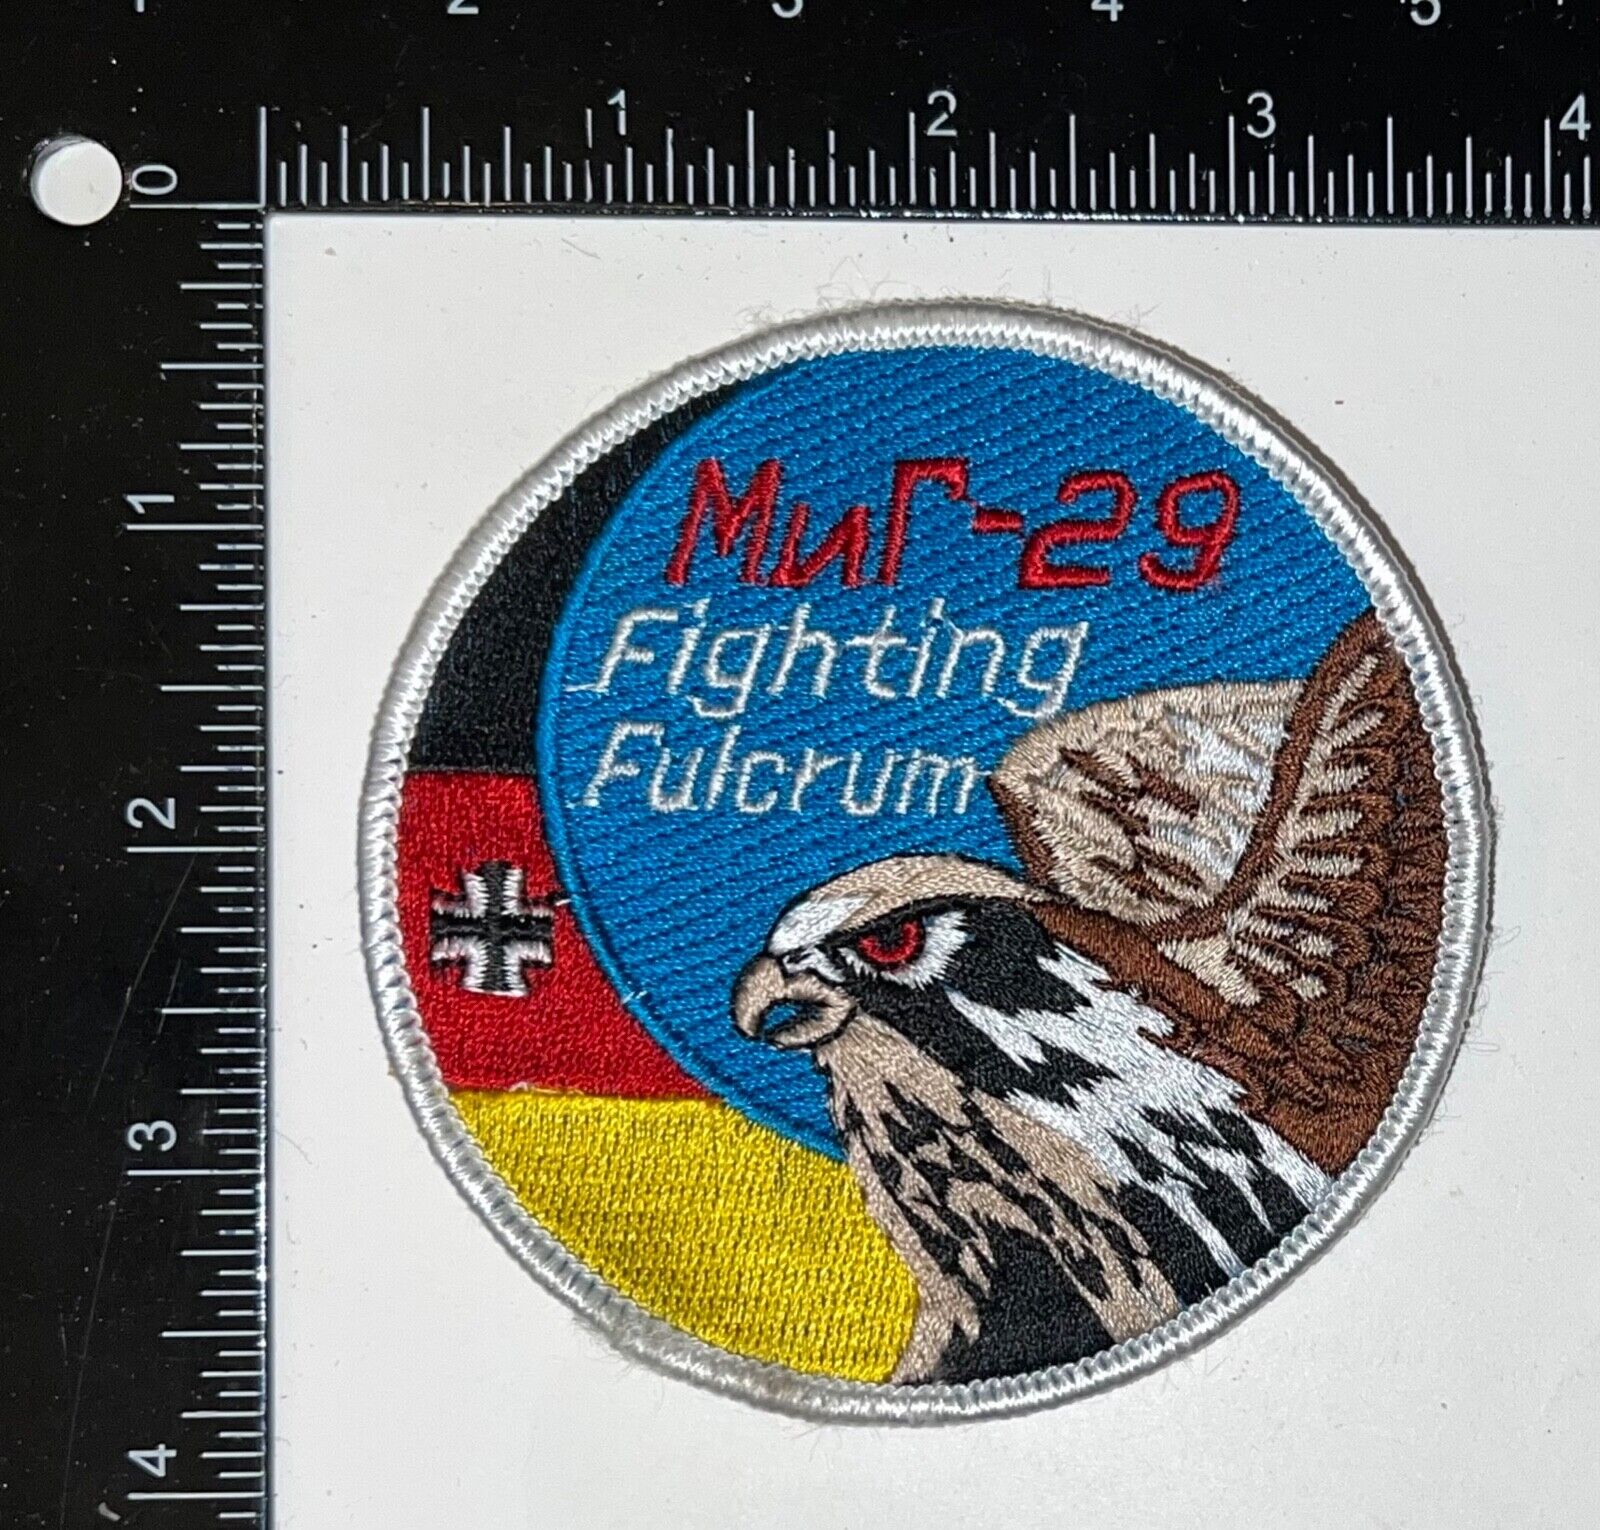 USAF US Air Force MIG-29 Fighting Fulcrum Patch